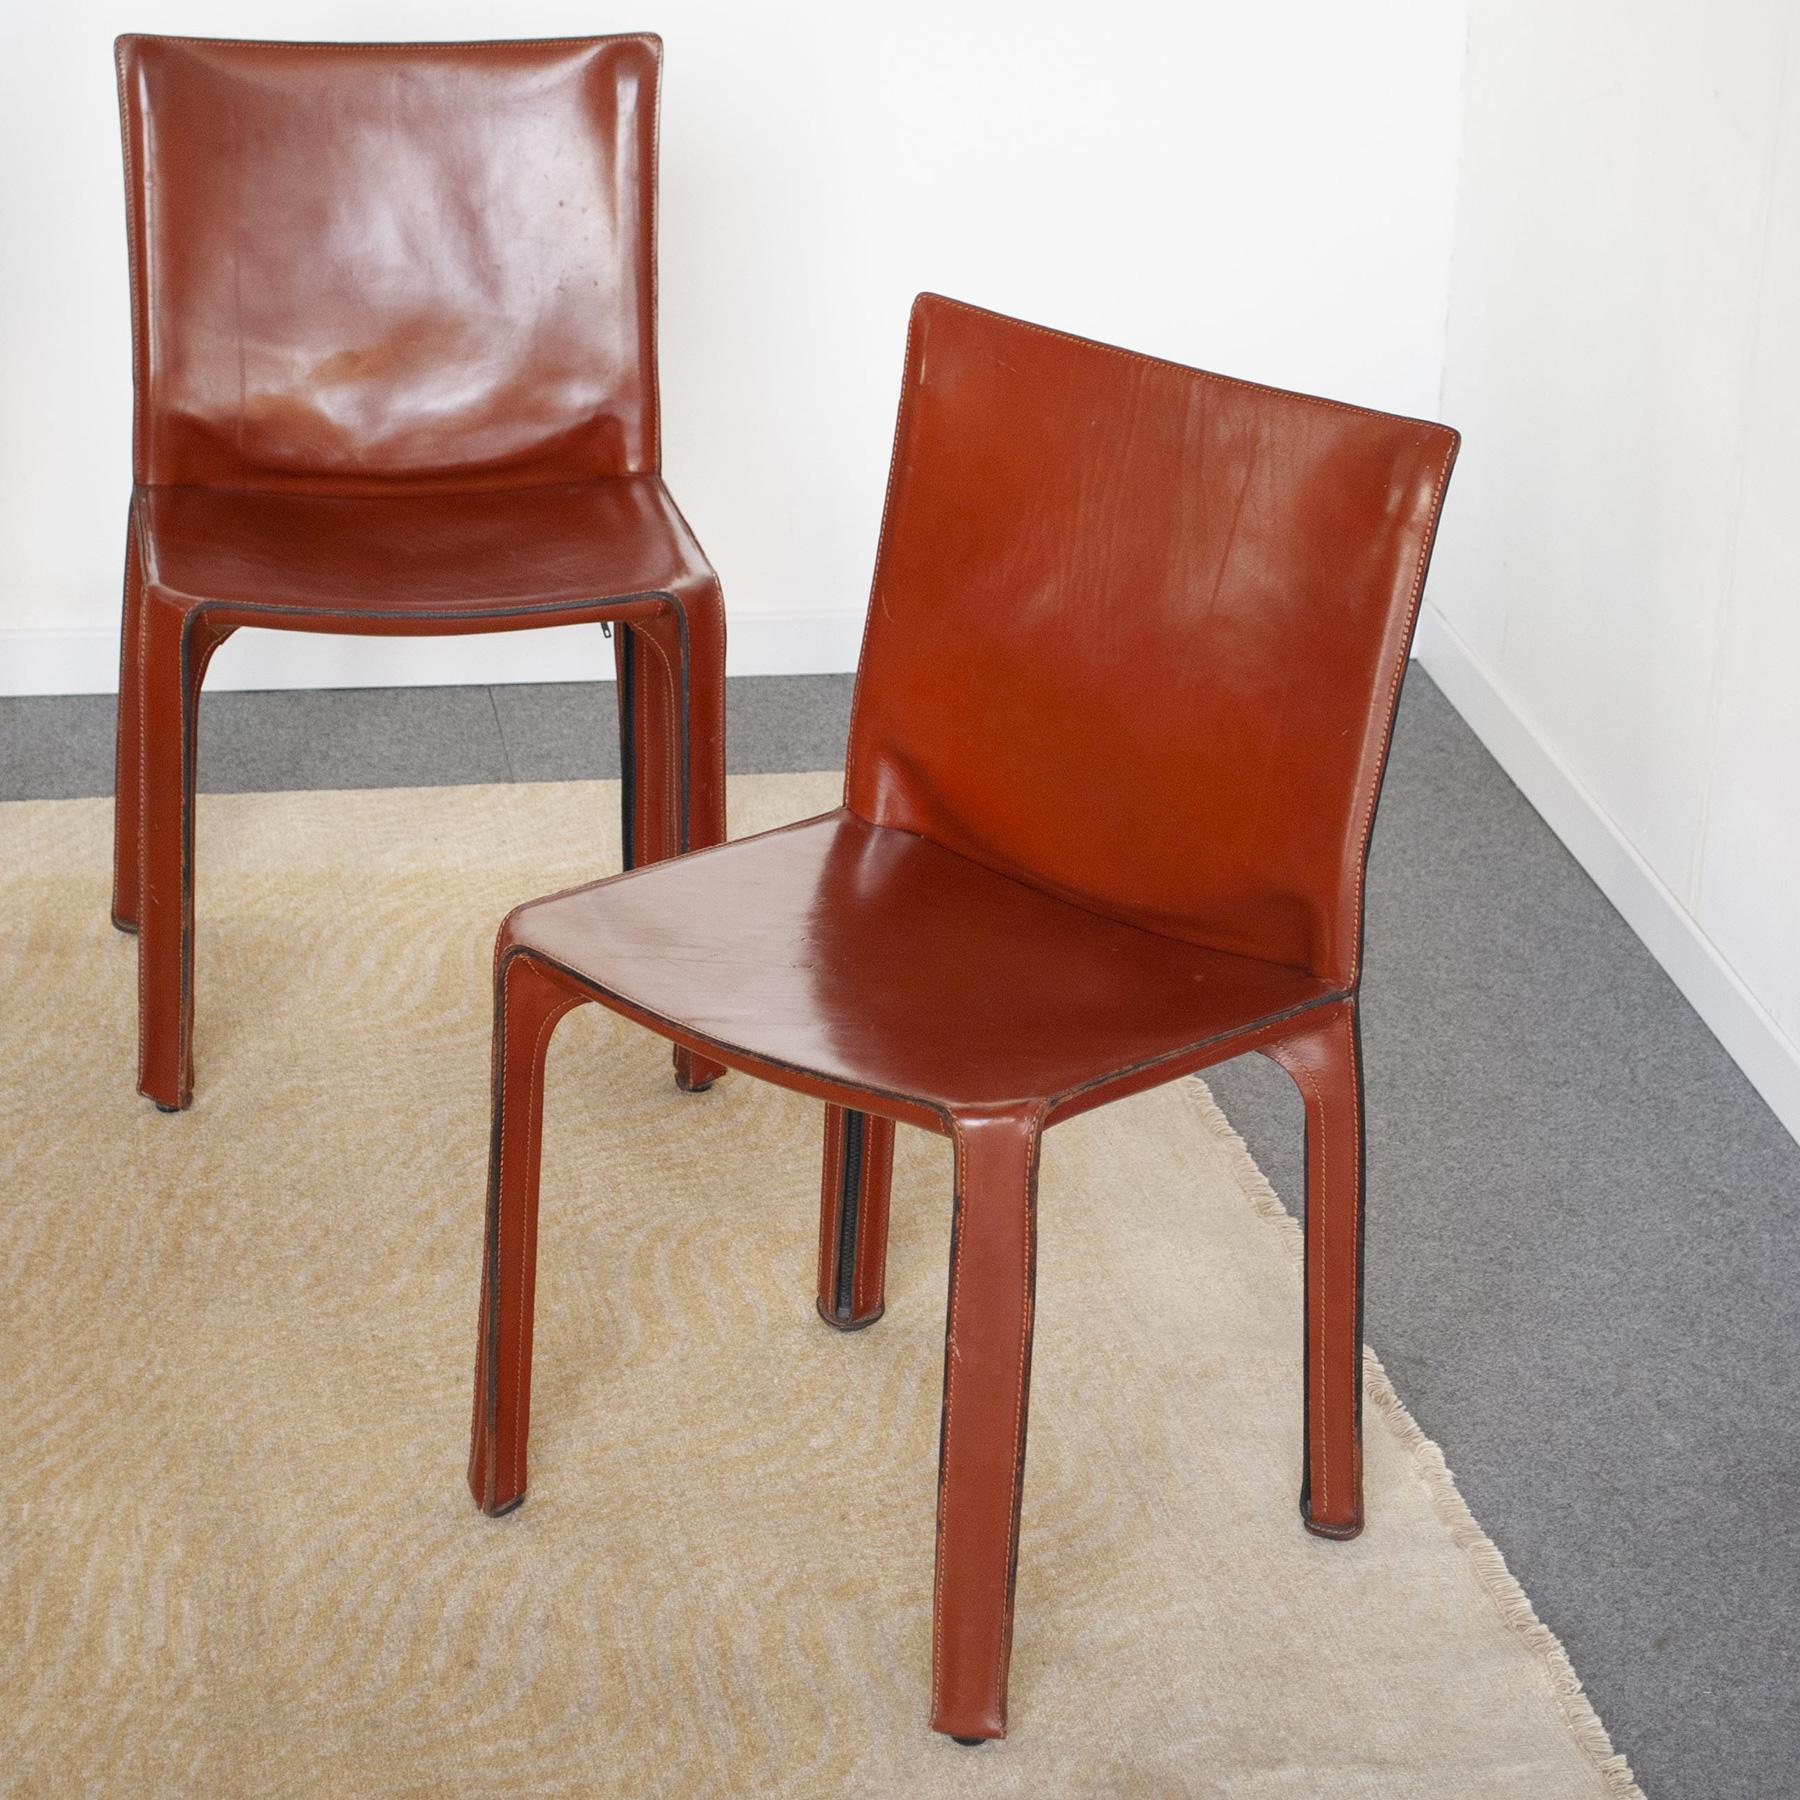 Set of four chairs model 412 D11 Cab produced by Cassina design Mario Bellini, year 1977. Metallic structure and a leather upholstery in leather color closed with hinges.